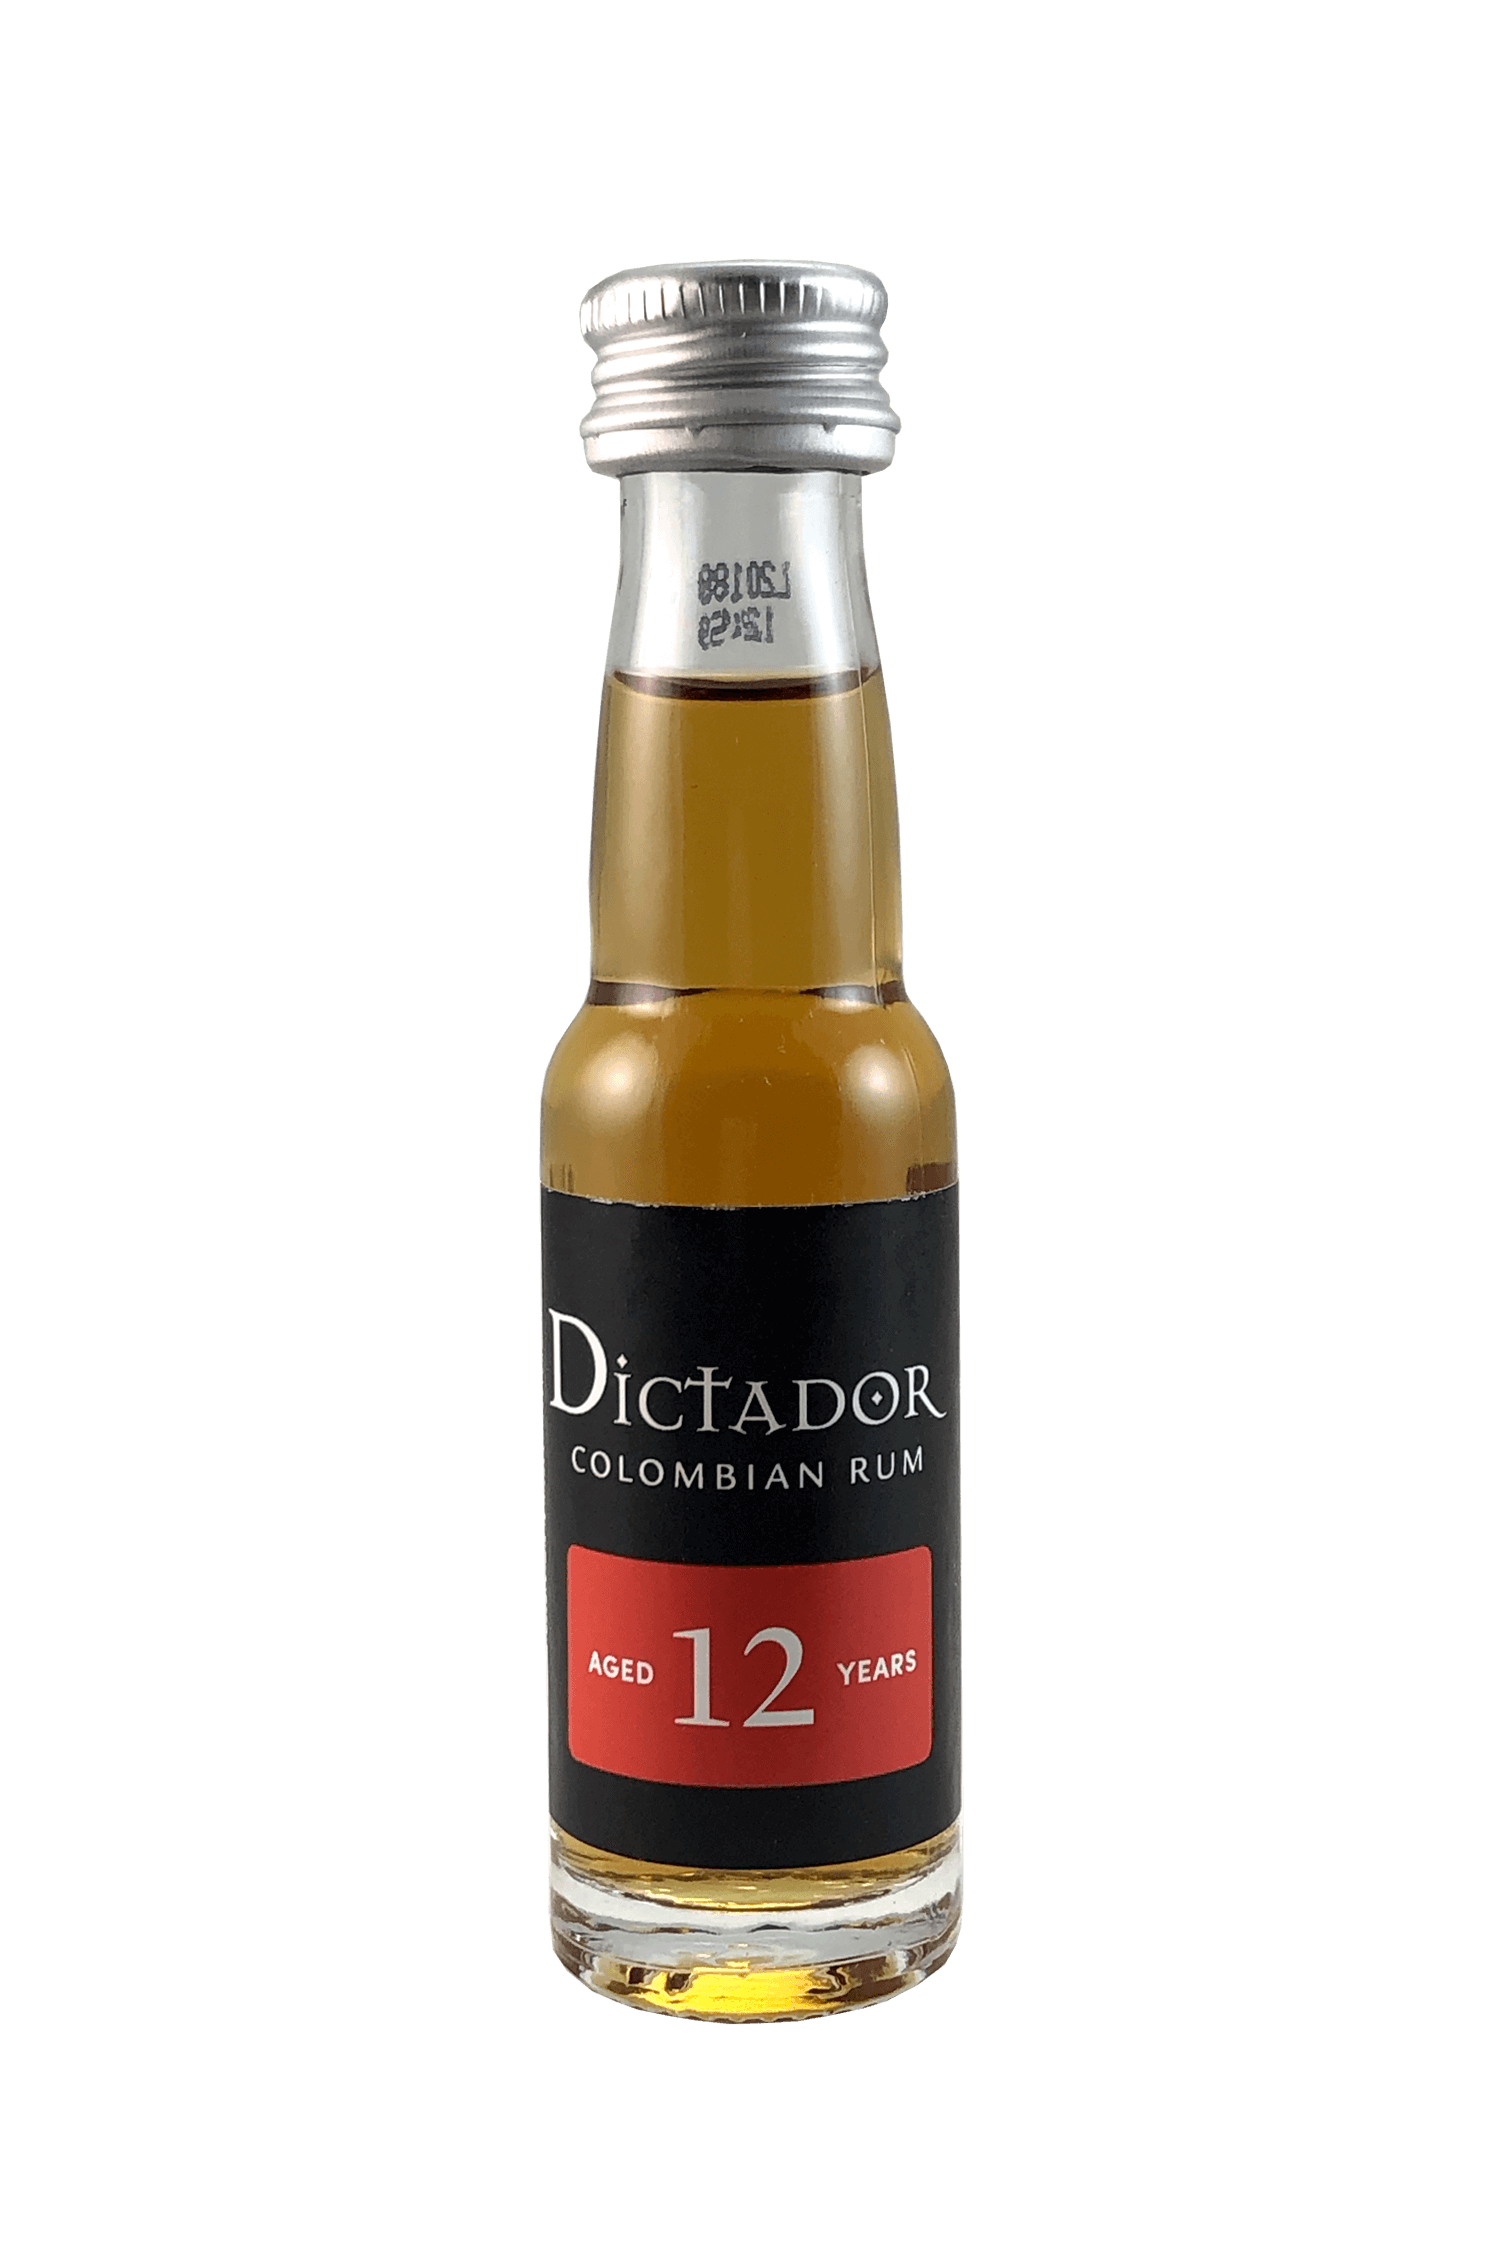 DICTADOR COLOMBIAN RUM ACED 12 YEARS